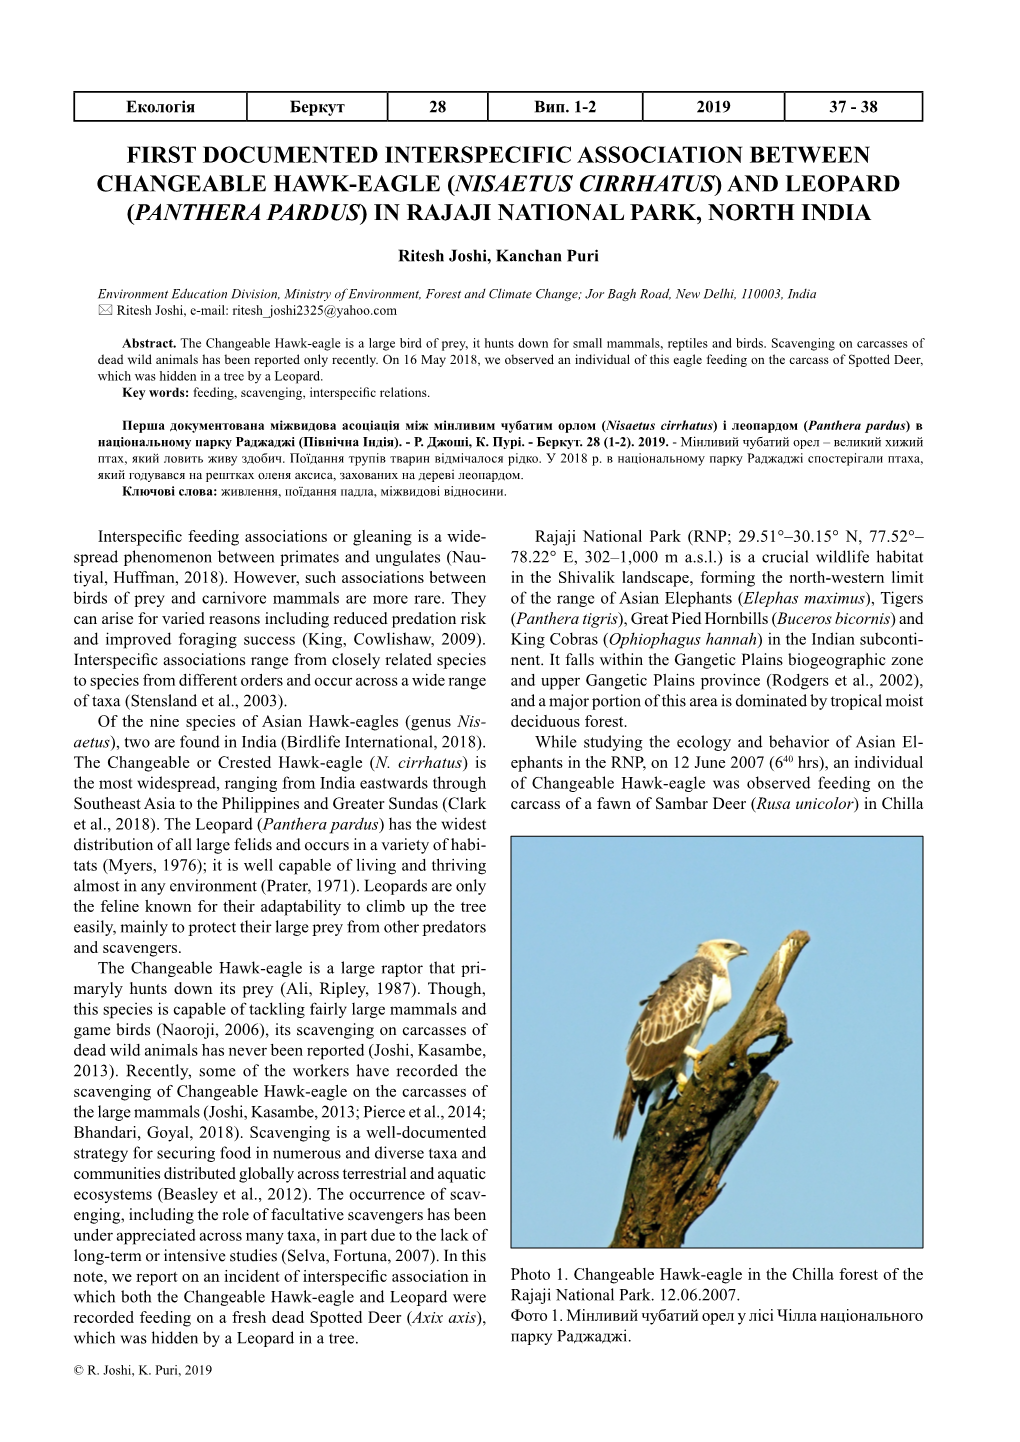 First Documented Interspecific Association Between Changeable Hawk-Eagle (Nisaetus Cirrhatus) and Leopard (Panthera Pardus) in Rajaji National Park, North India